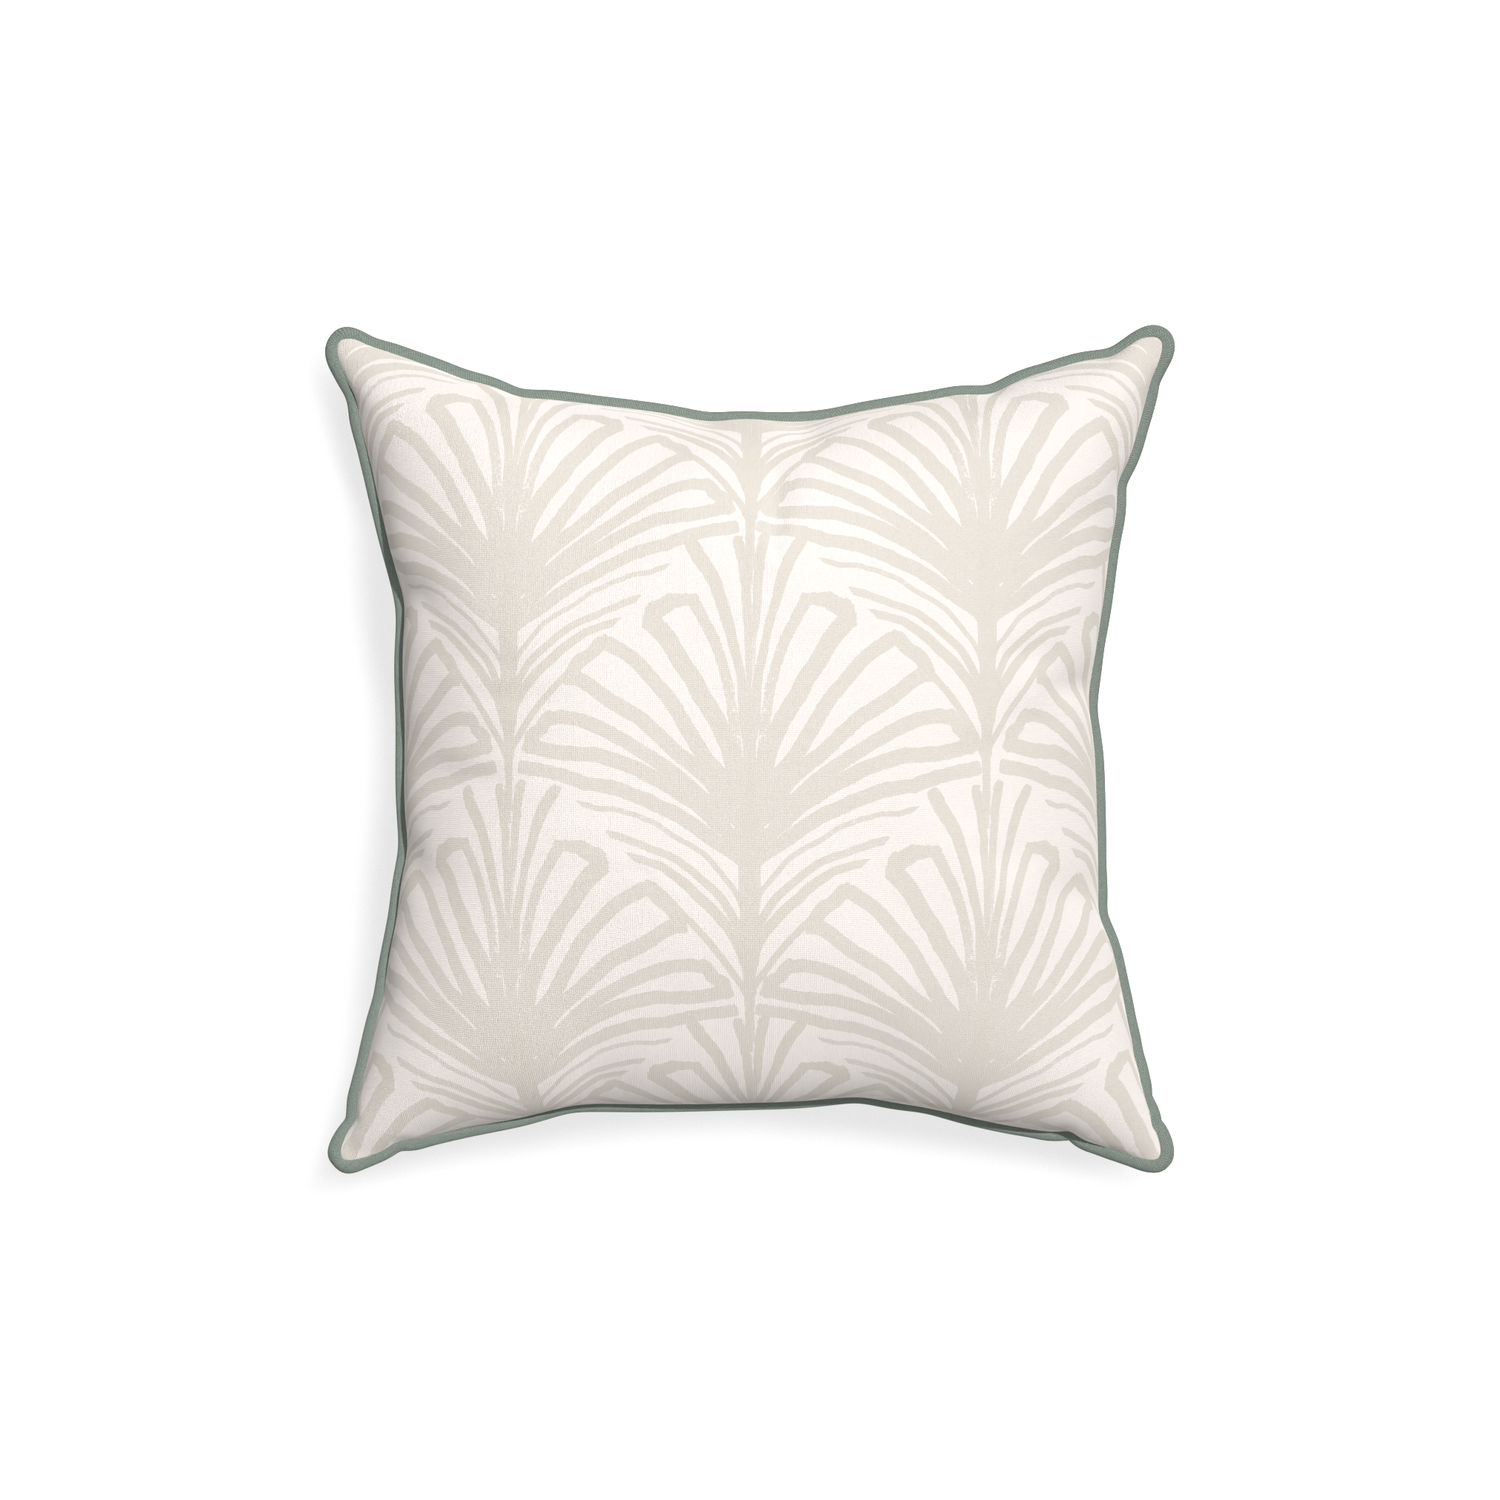 18-square suzy sand custom beige palmpillow with sage piping on white background